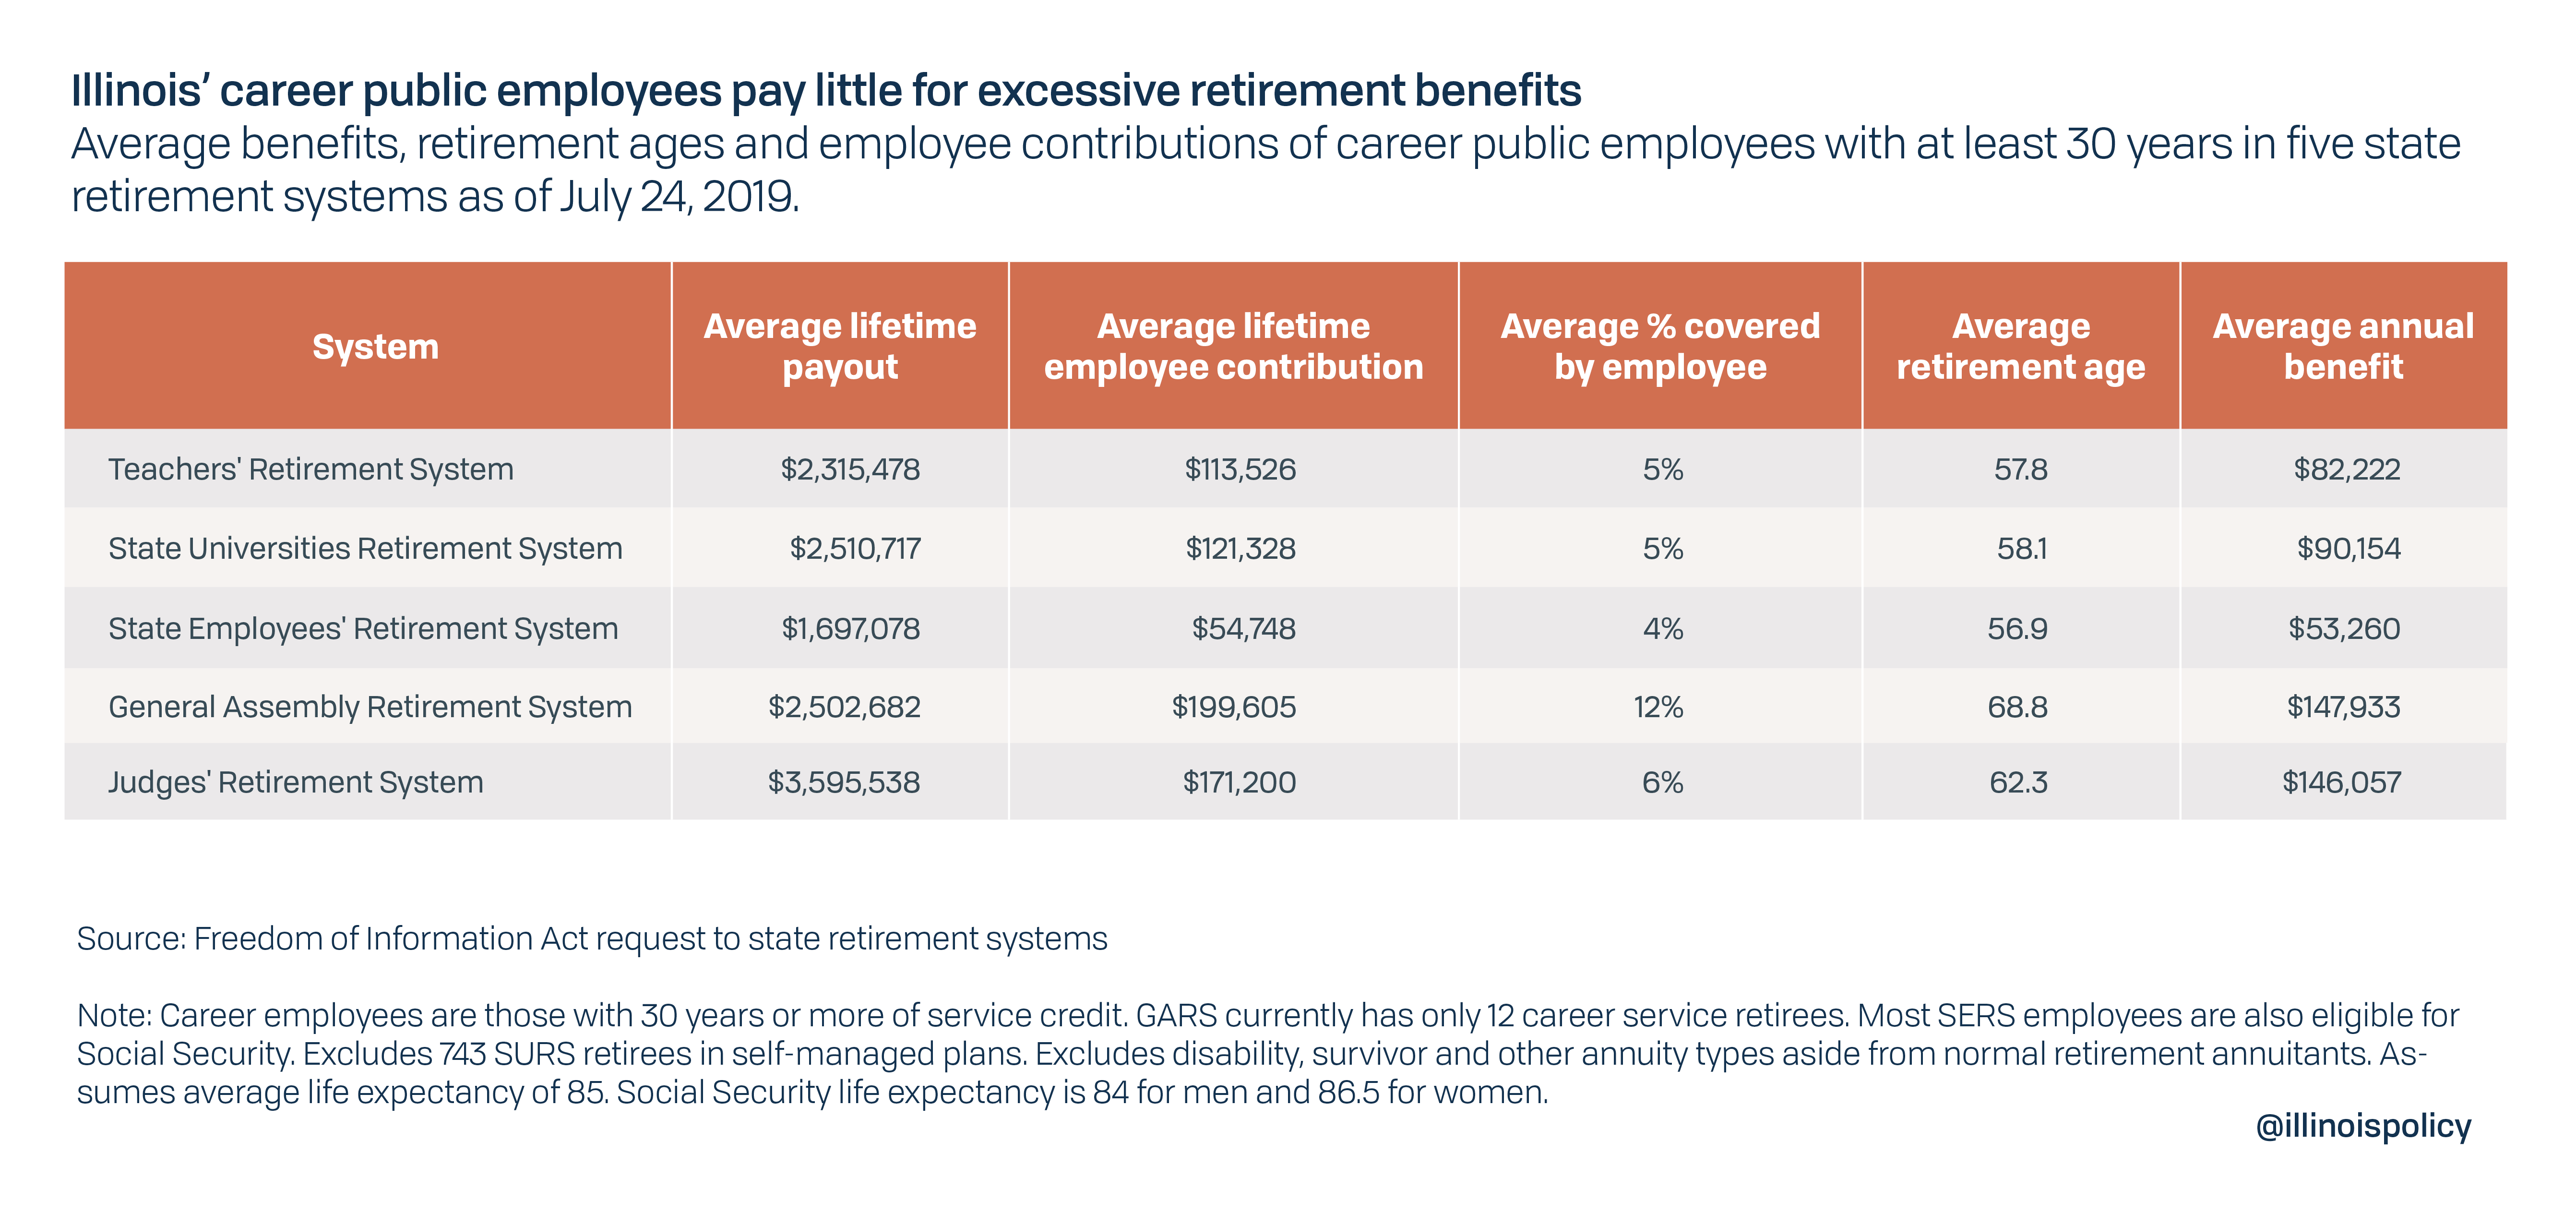 Illinois' career public employees pay little for excessive retirement benefits